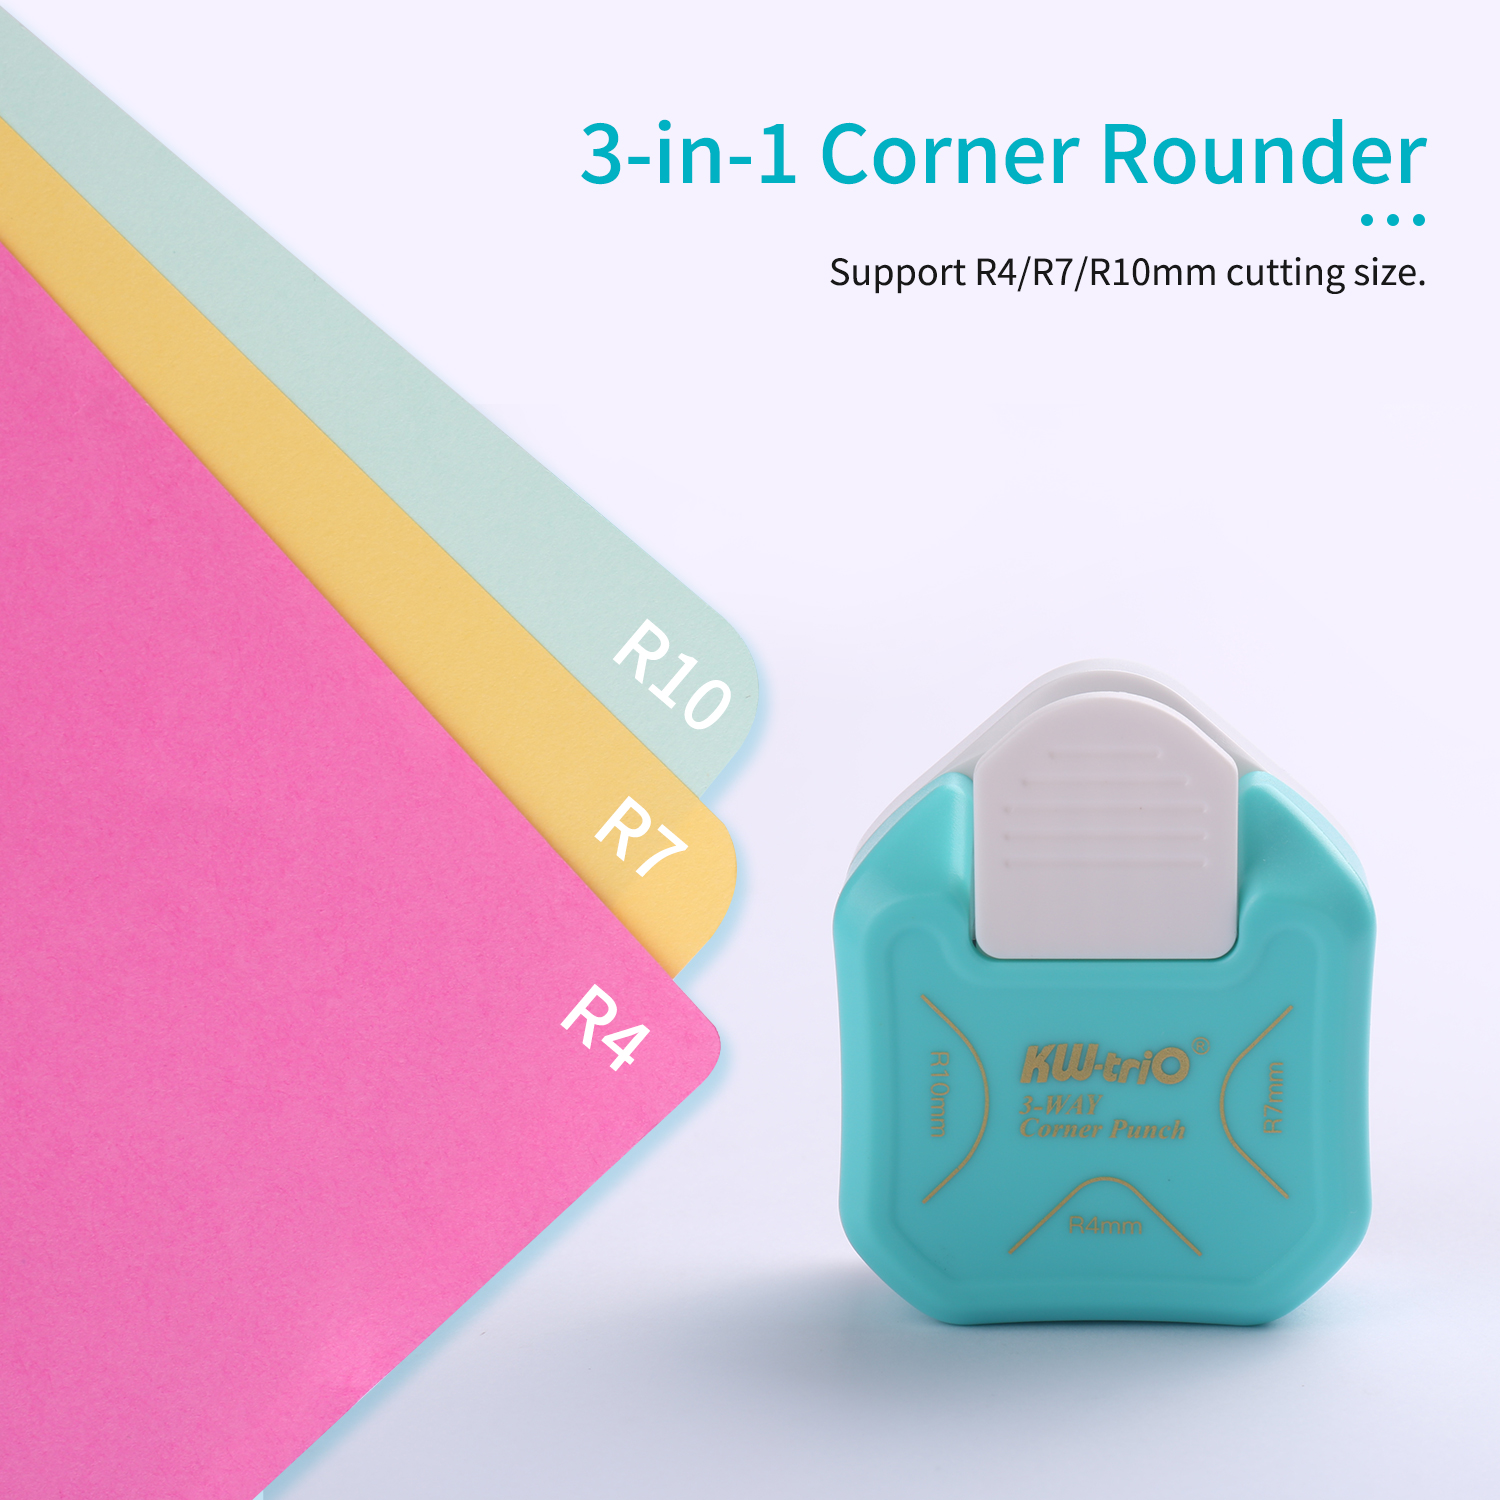 R10 10mm Rounder, Round Corner Punch, Paper,Card Photo Cartons